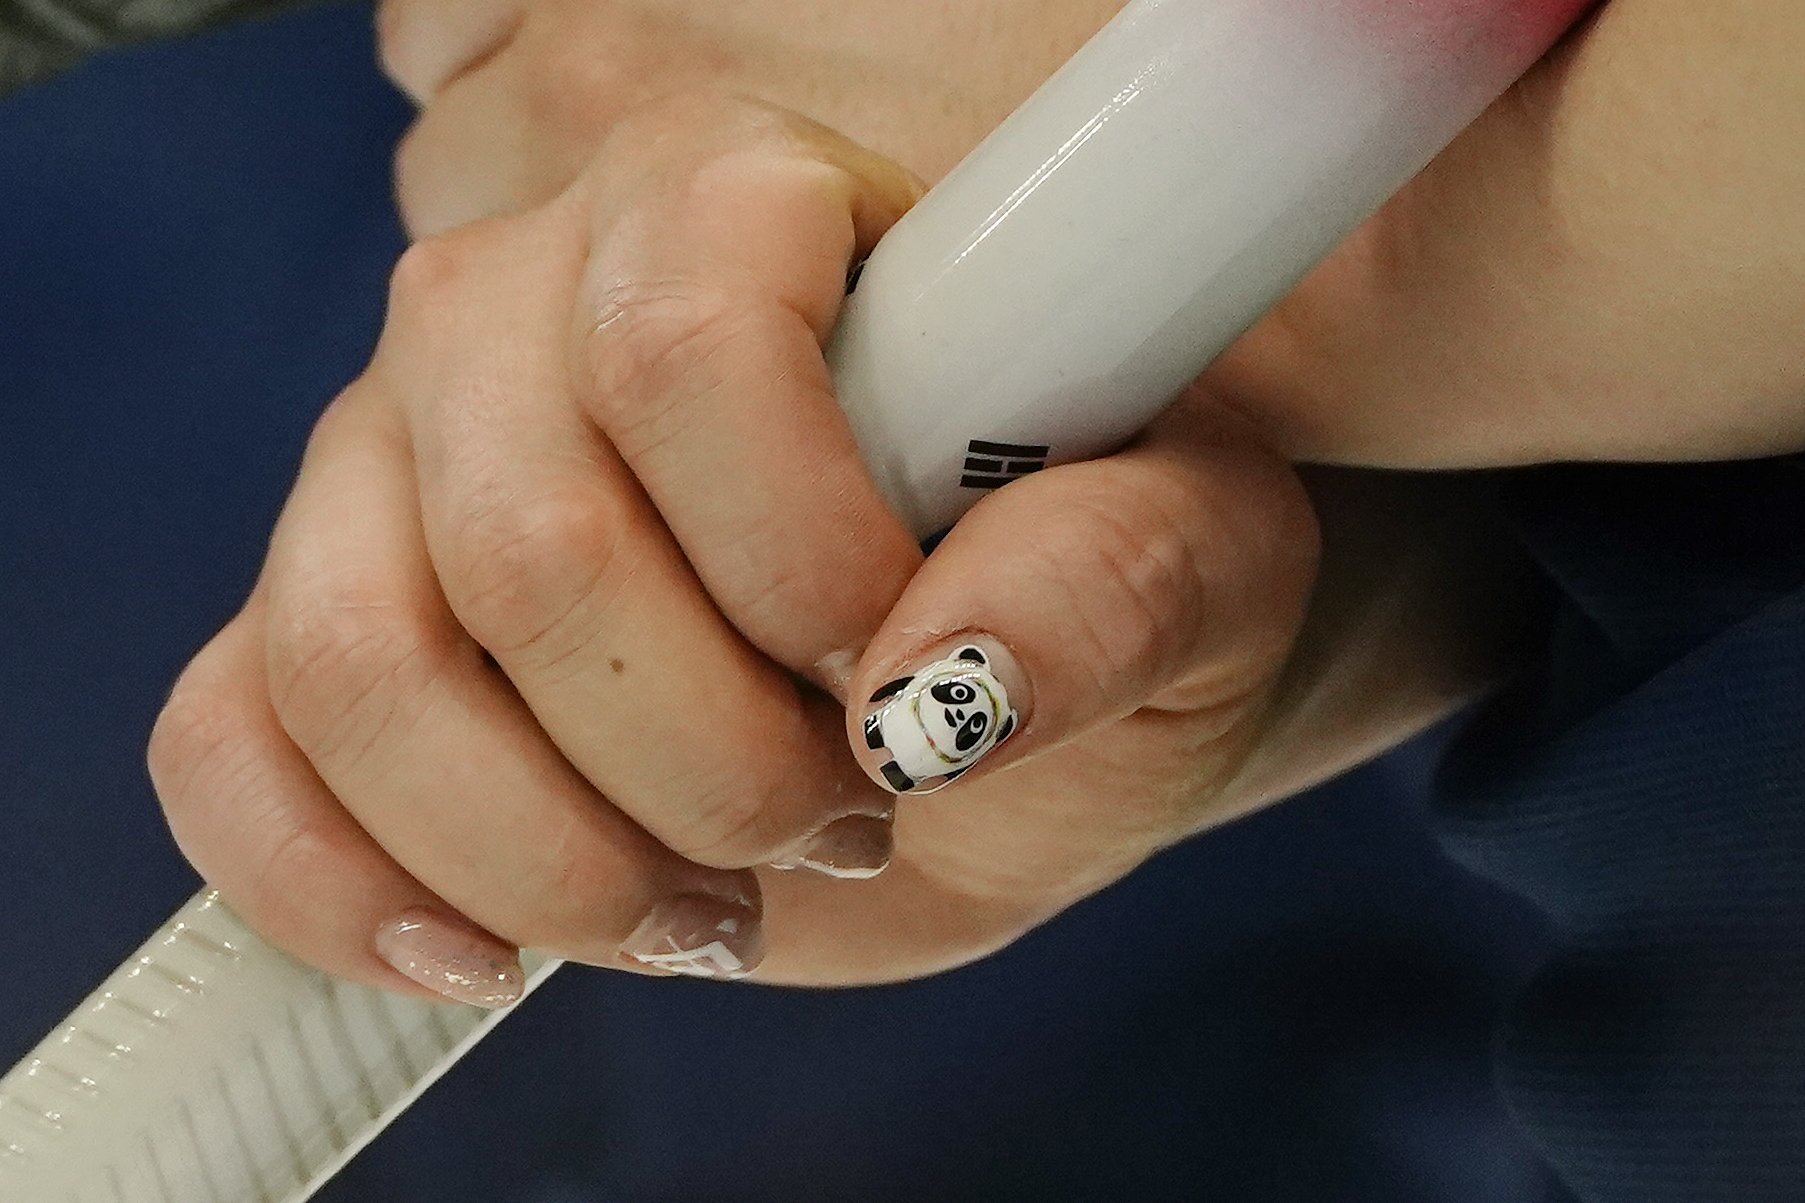  South Korea's Kim Kyeong-ae has Bing Dwen Dwen, the Beijing Winter Olympics mascot, on her nails during a women's curling match against Britain at the Beijing Winter Olympics Friday, Feb. 11, 2022, in Beijing. (AP Photo/Brynn Anderson) 